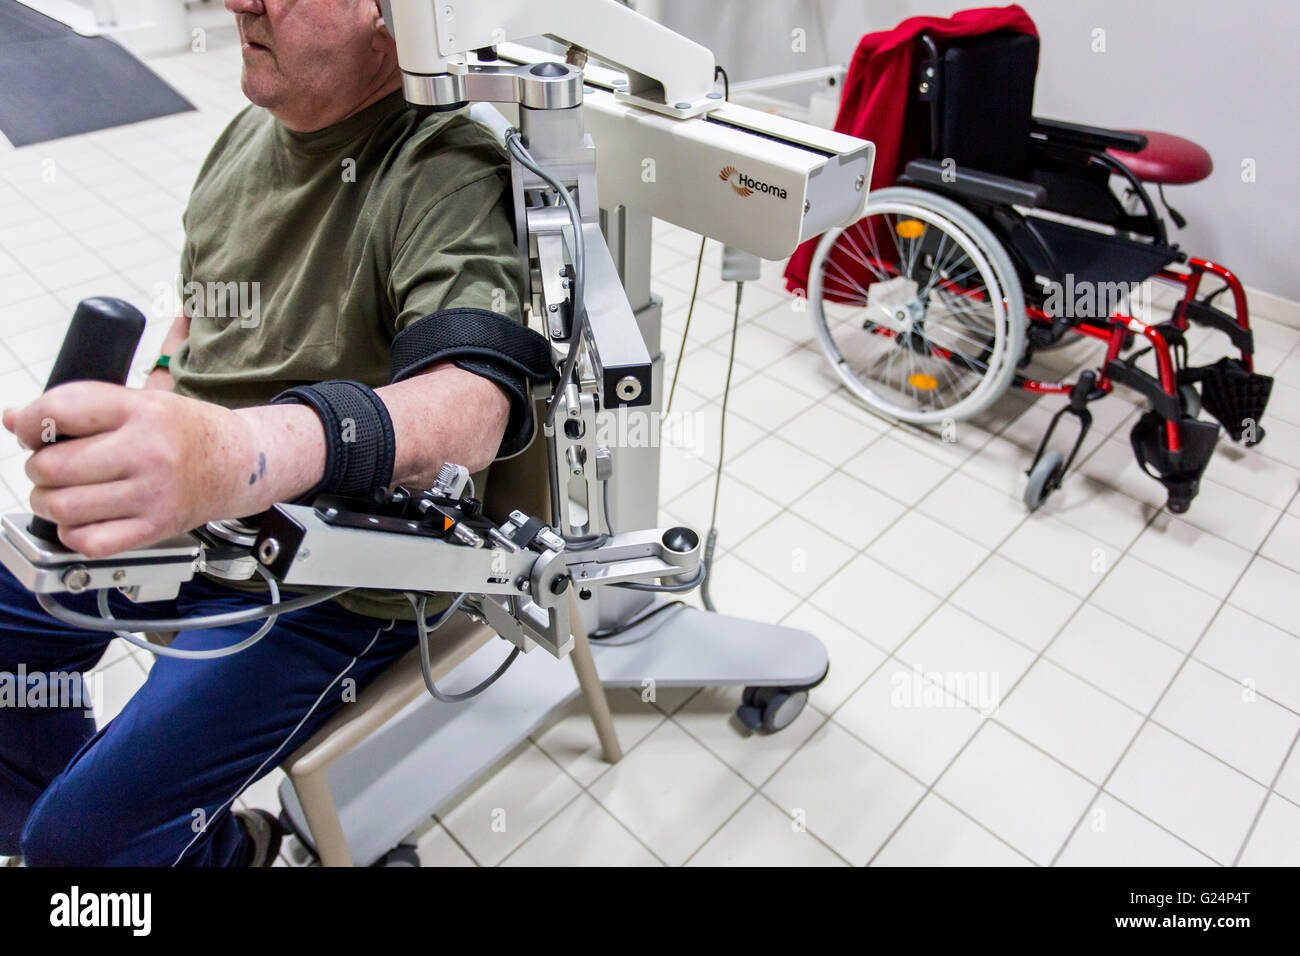 Robotic assistance to grip, Exoskeleton Armeo Spring robotic arm, Clinique Saint-Roch, Cambrai, France. Stock Photo